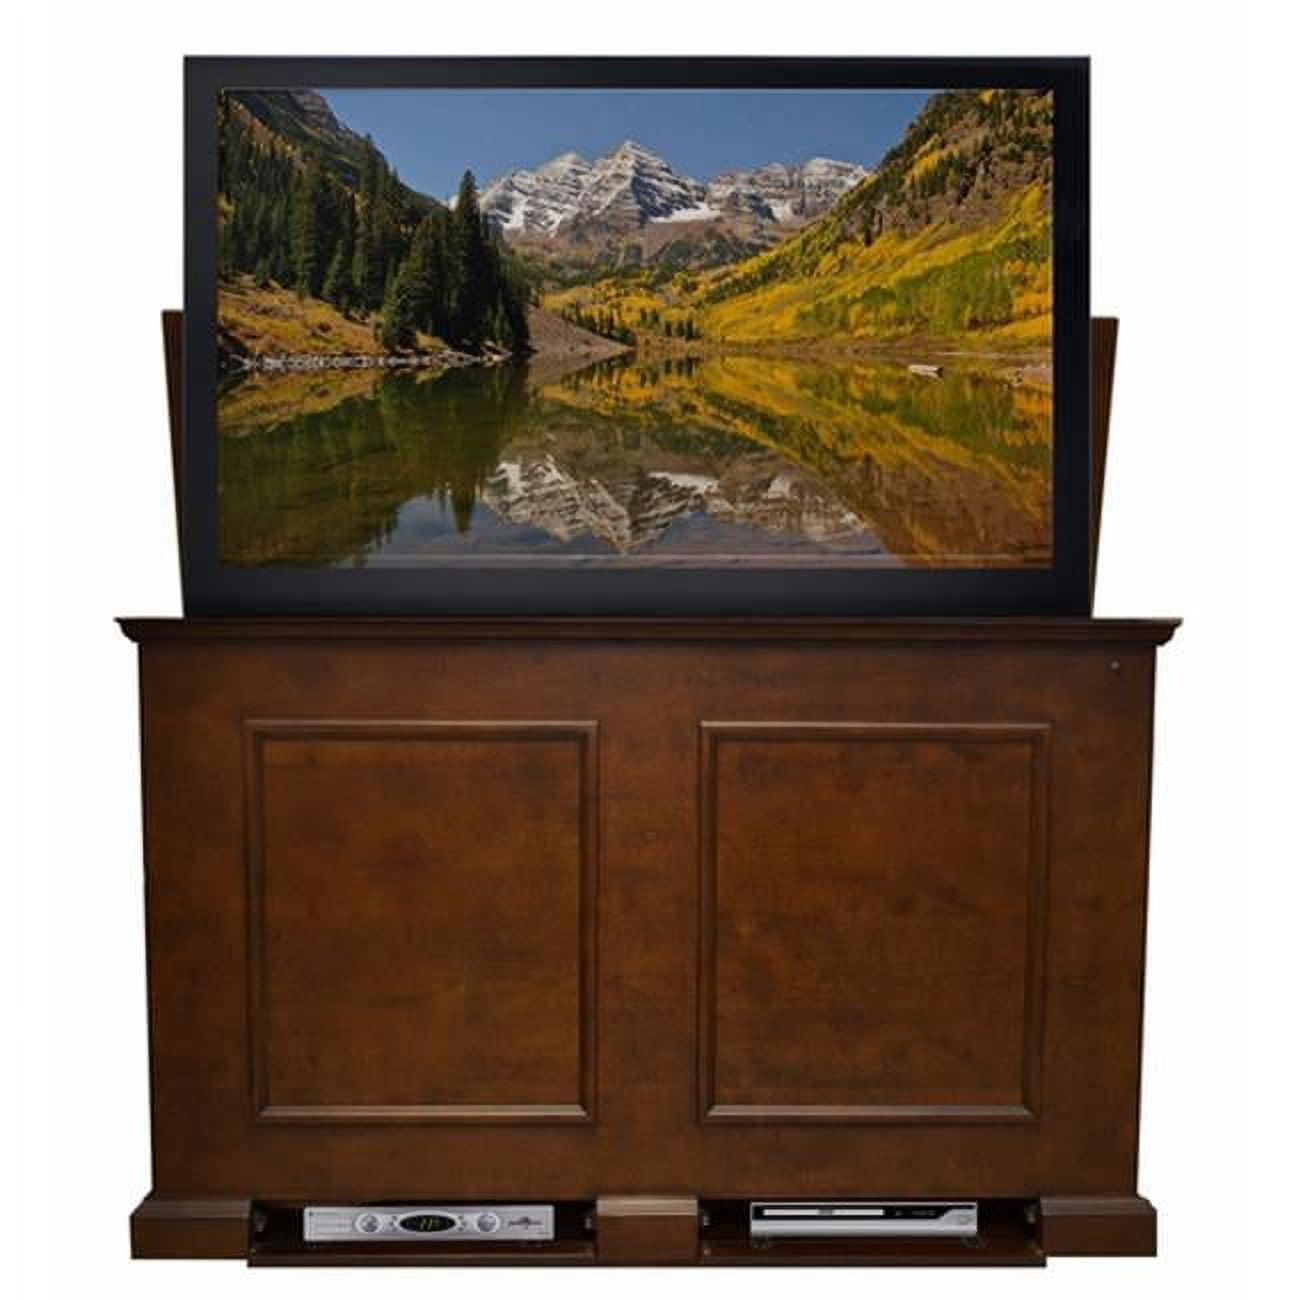 Espresso Motorized TV Lift Cabinet with Integrated Mount for 65" TV